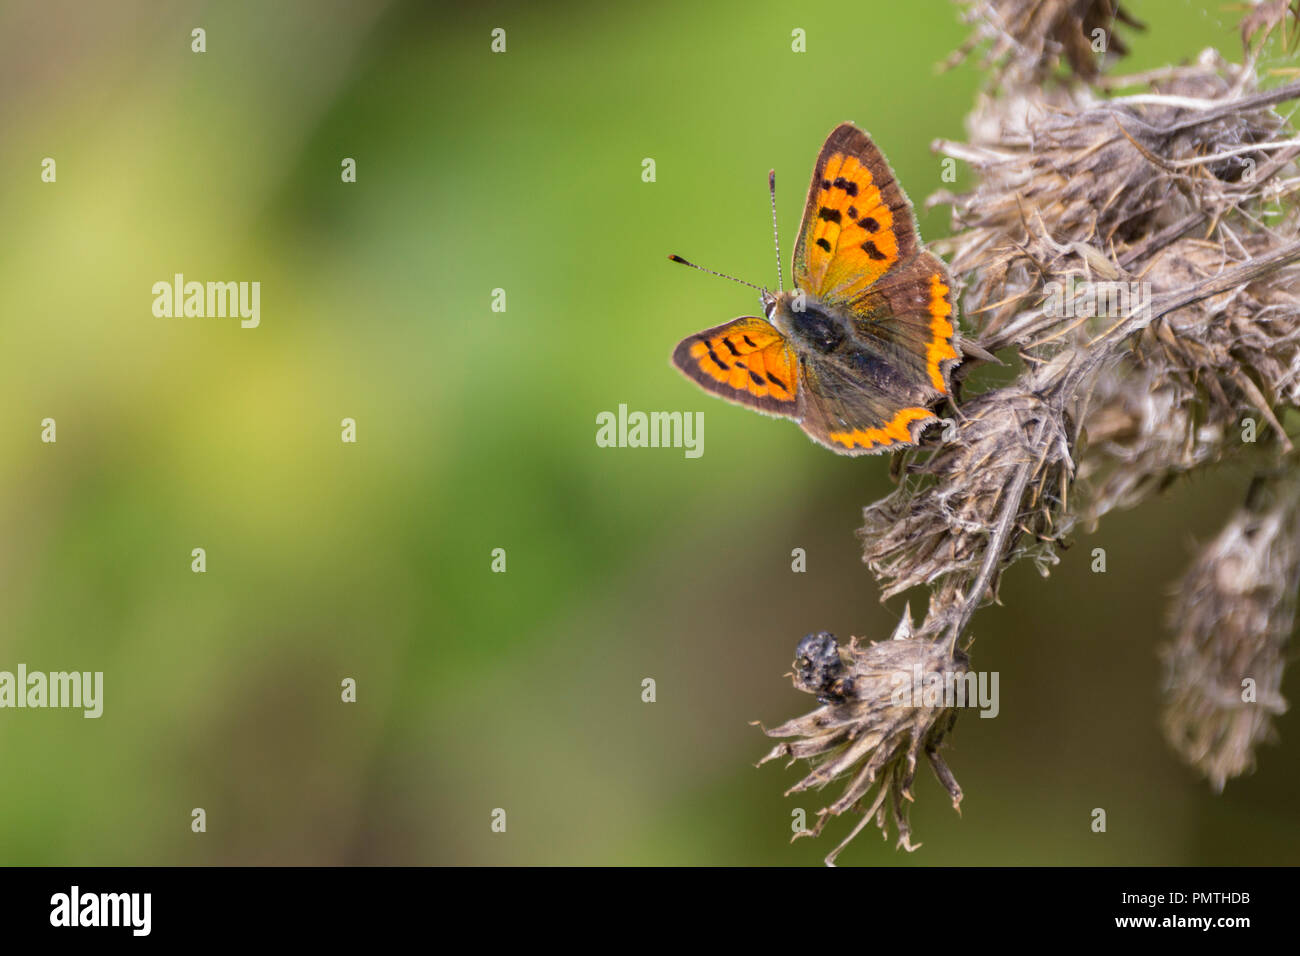 Small copper (Lycaena phlareas) butterfly with orange and dark brown spotted upperwings and buff underwings with similar patterns to upperwings. Stock Photo